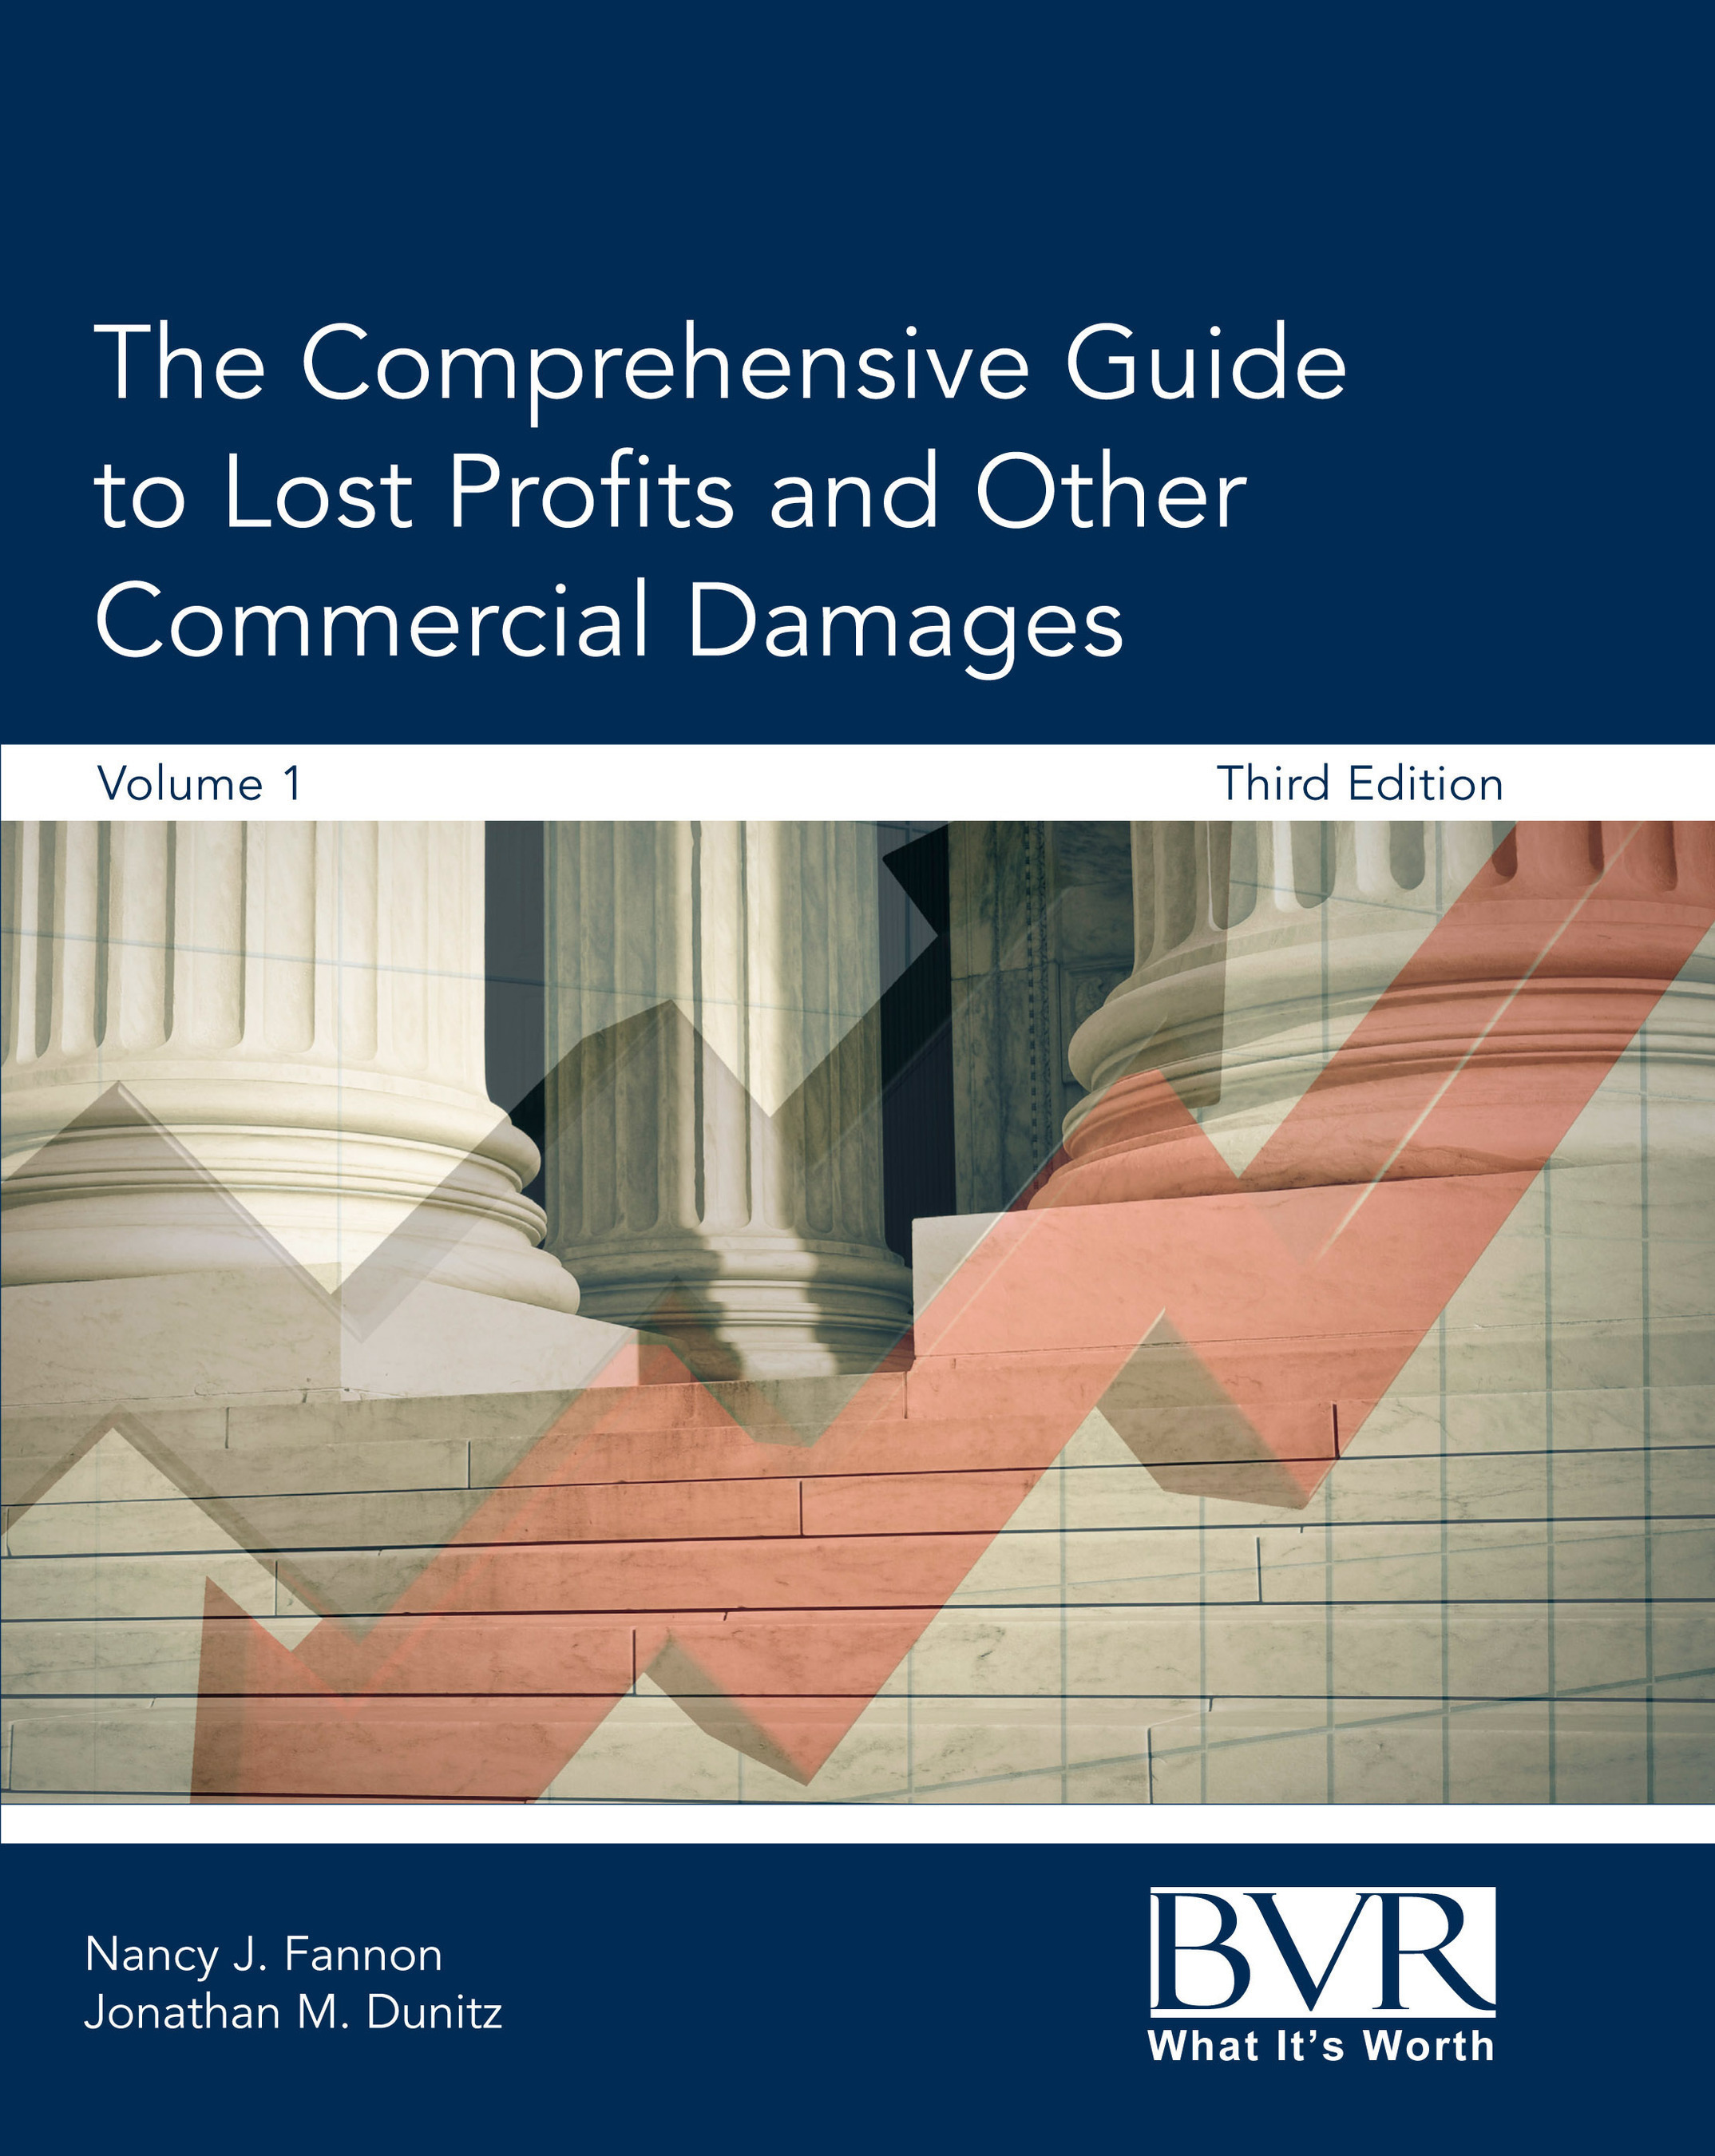 The Comprehensive Guide to Lost Profits and Other Commercial Damages, edited by Nancy Fannon and Jonathan Dunitz. (PRNewsFoto/Business Valuation Resources)